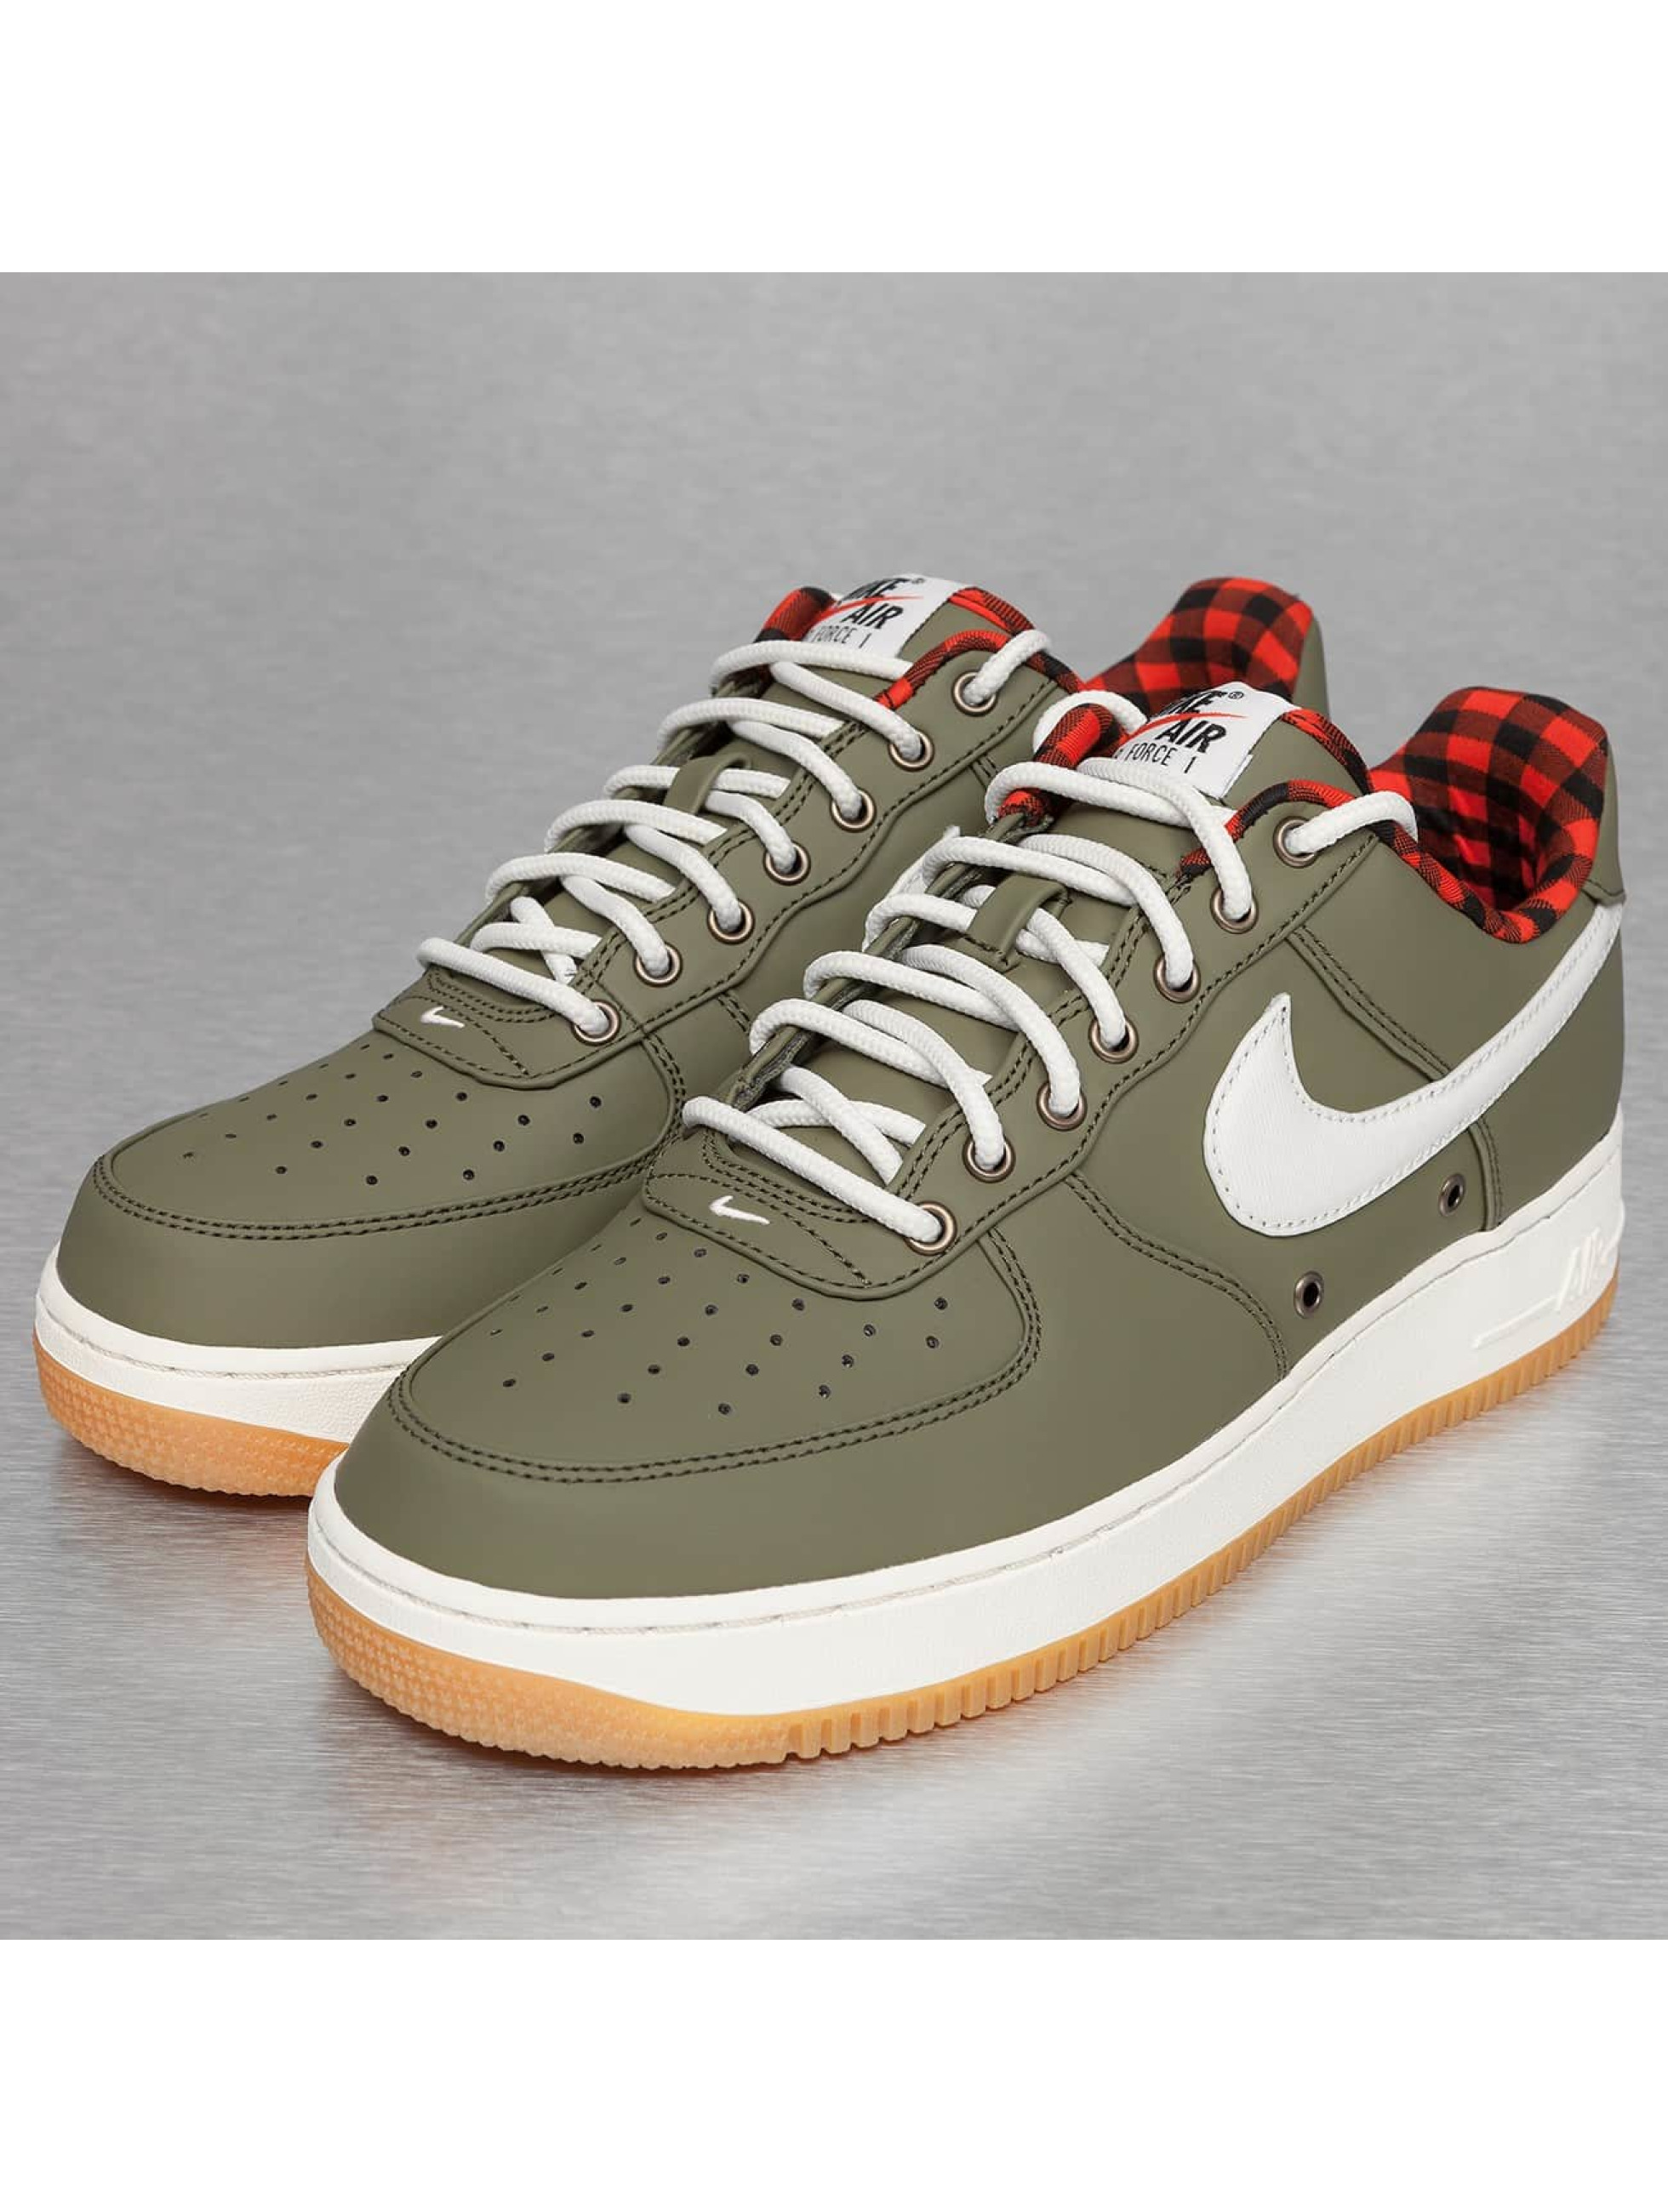 Nike Chaussures / Baskets Air Force 1 